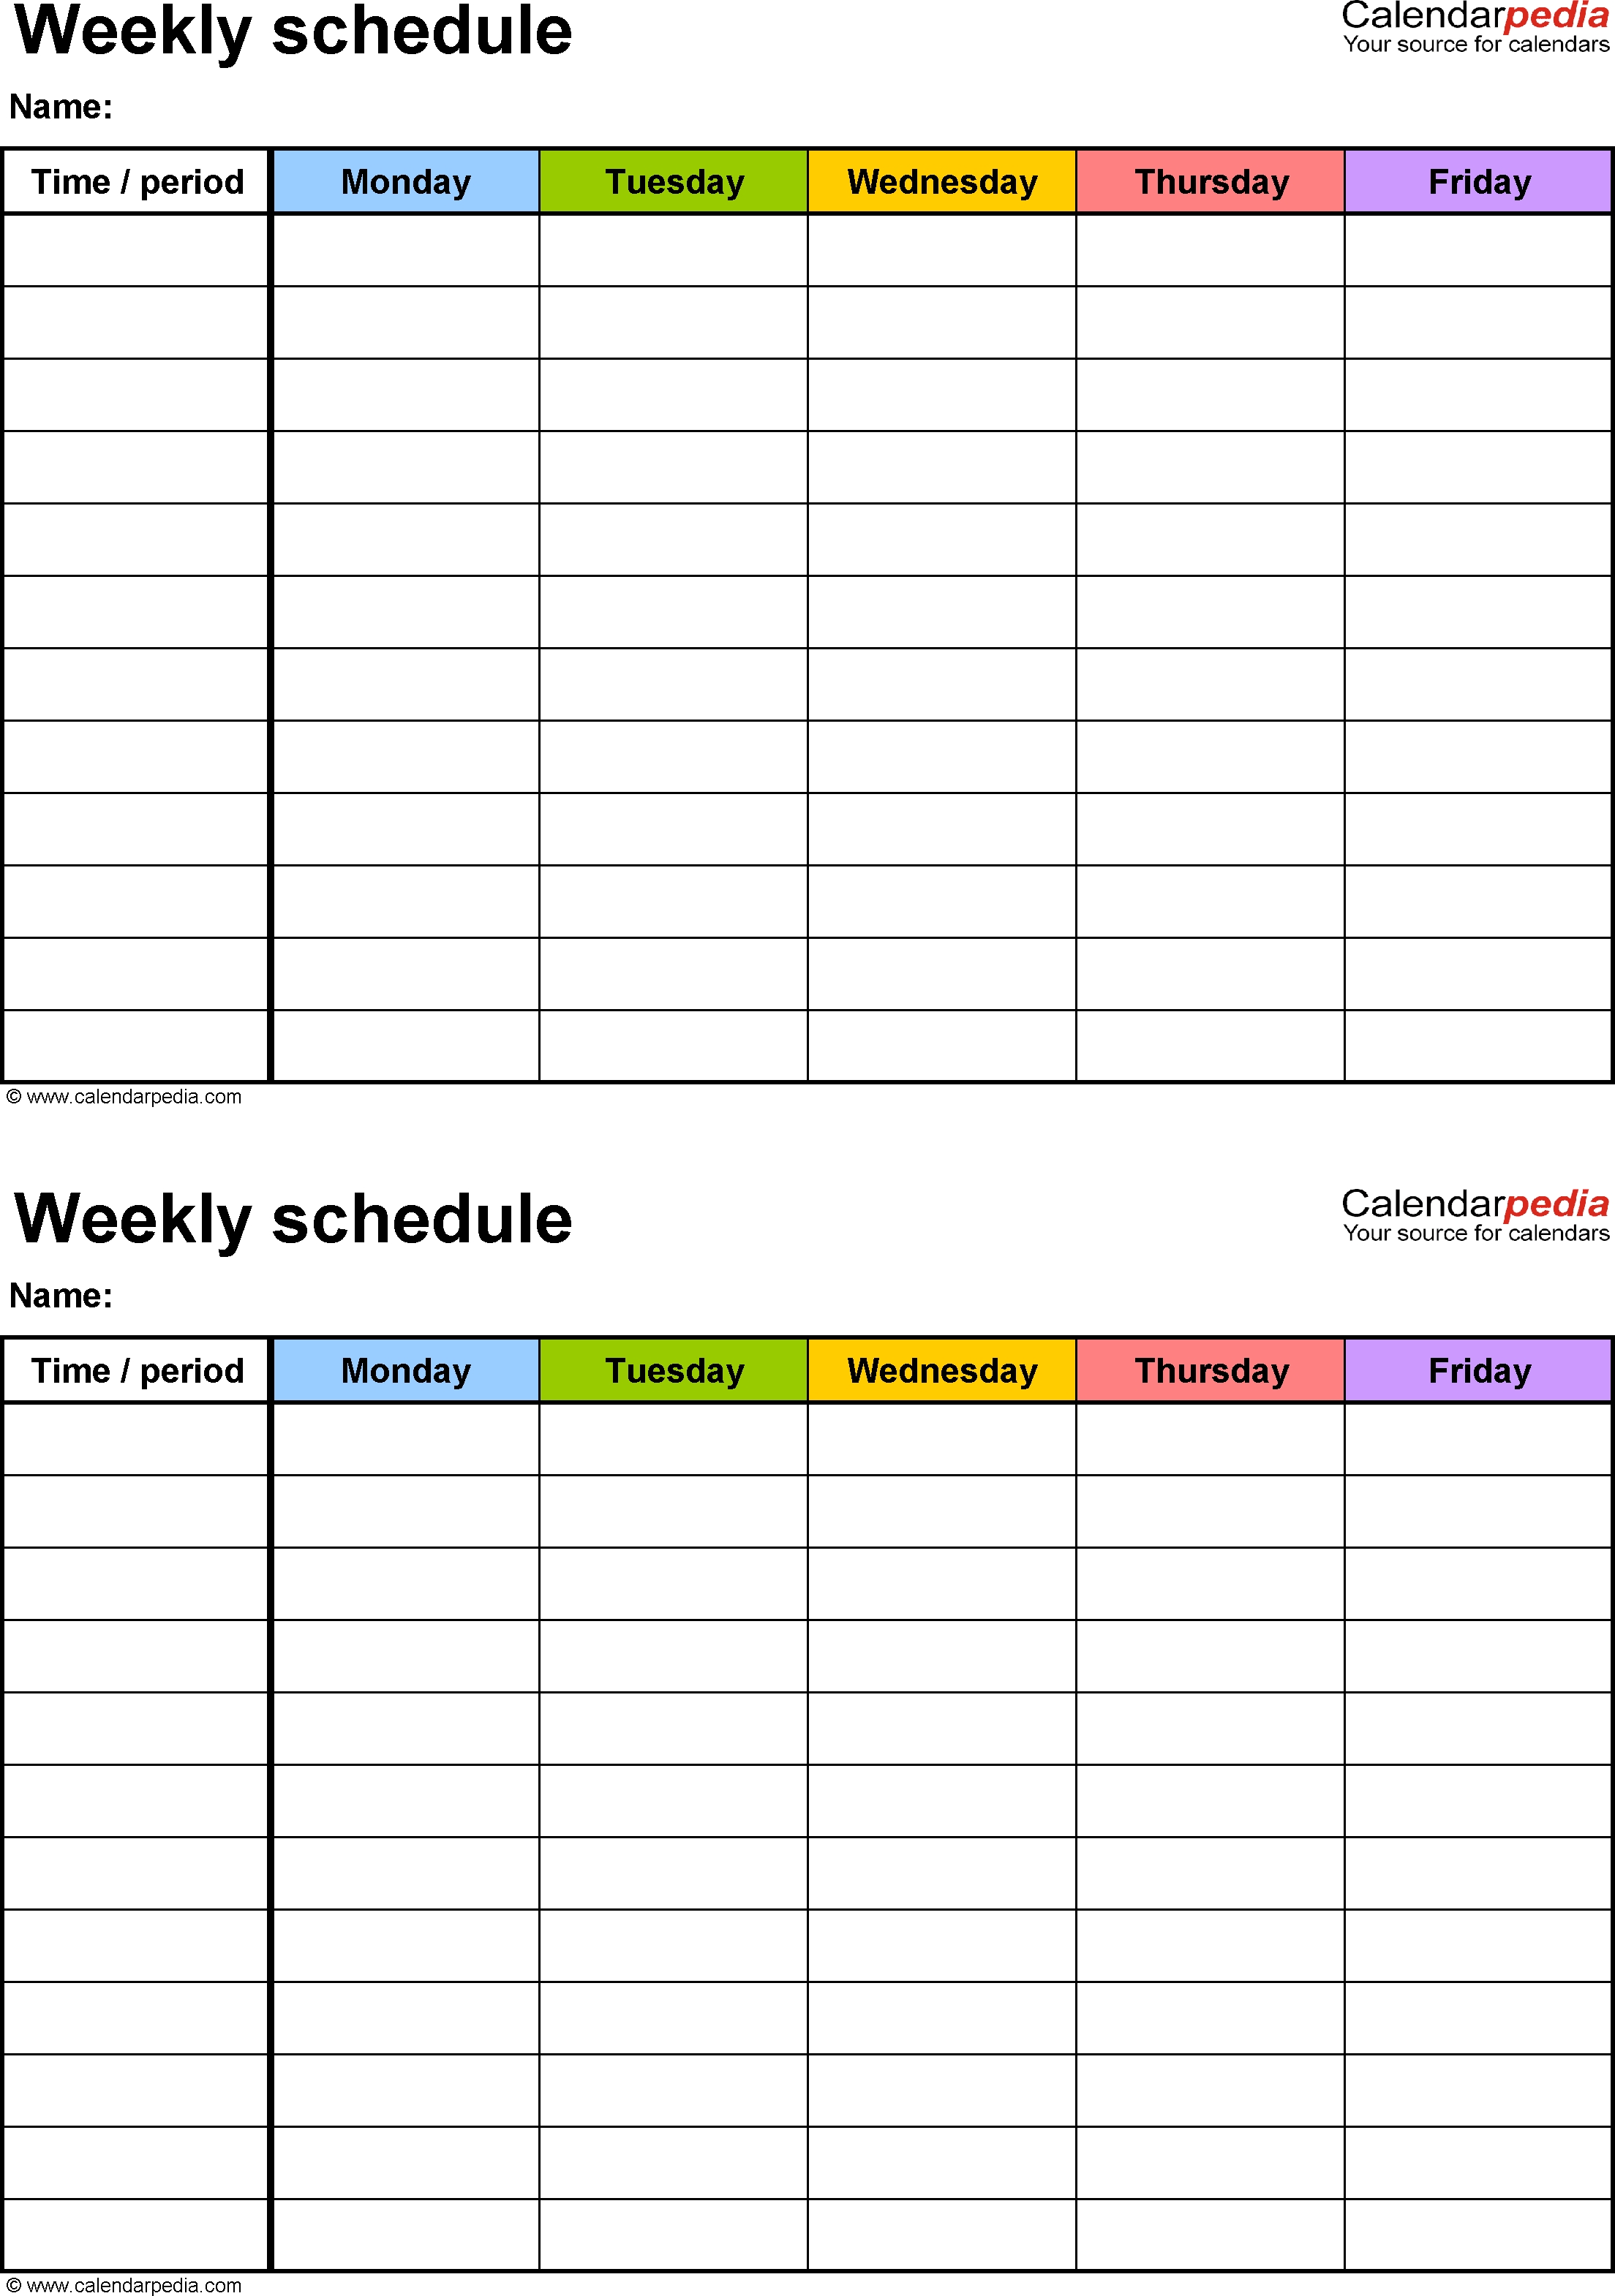 Free Weekly Schedule Templates For Word - 18 Templates for Blank Two Week Calendar Template